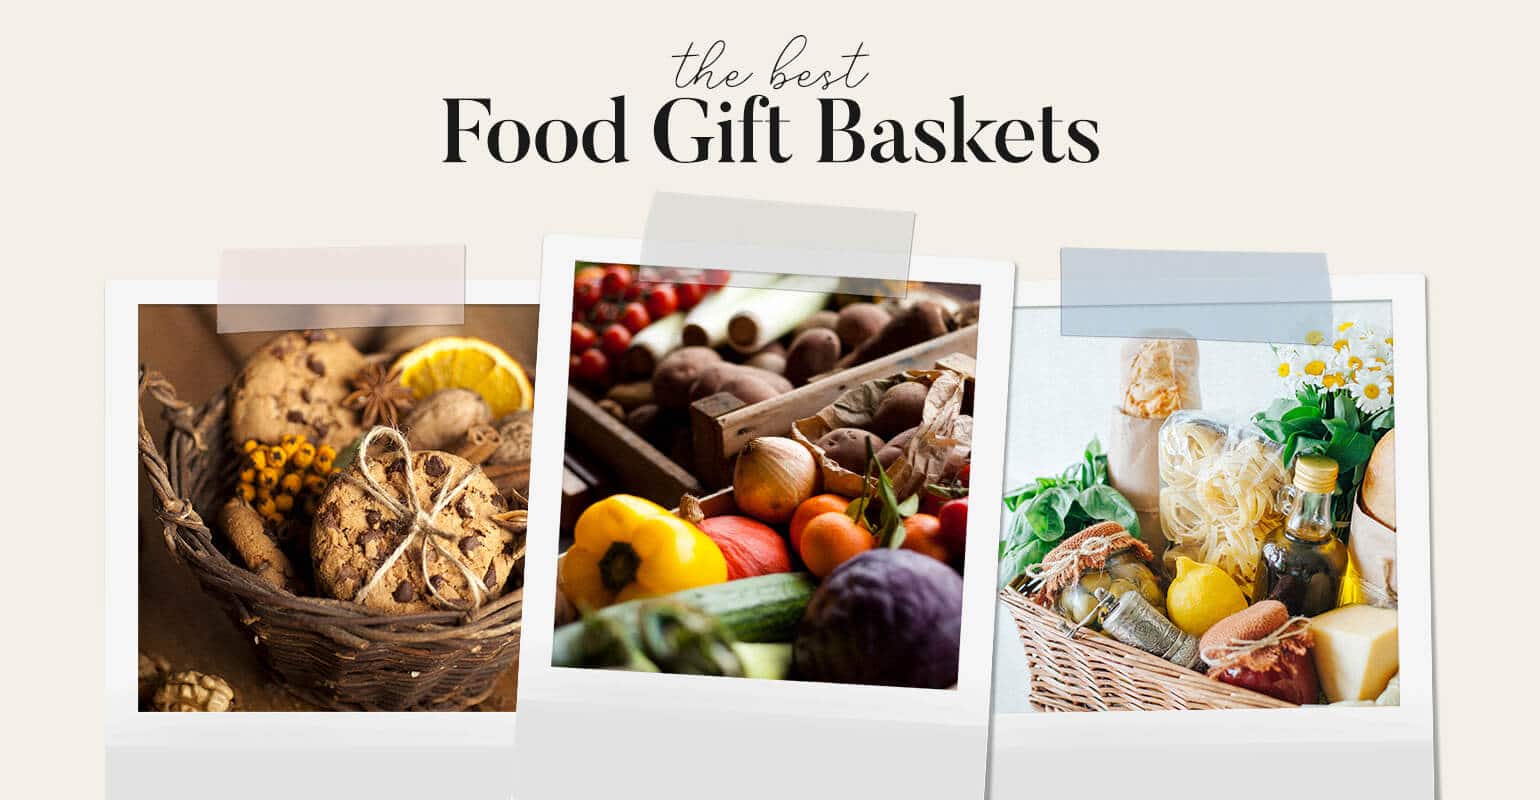 7 Food Gift Baskets That Everyone Wants to Receive